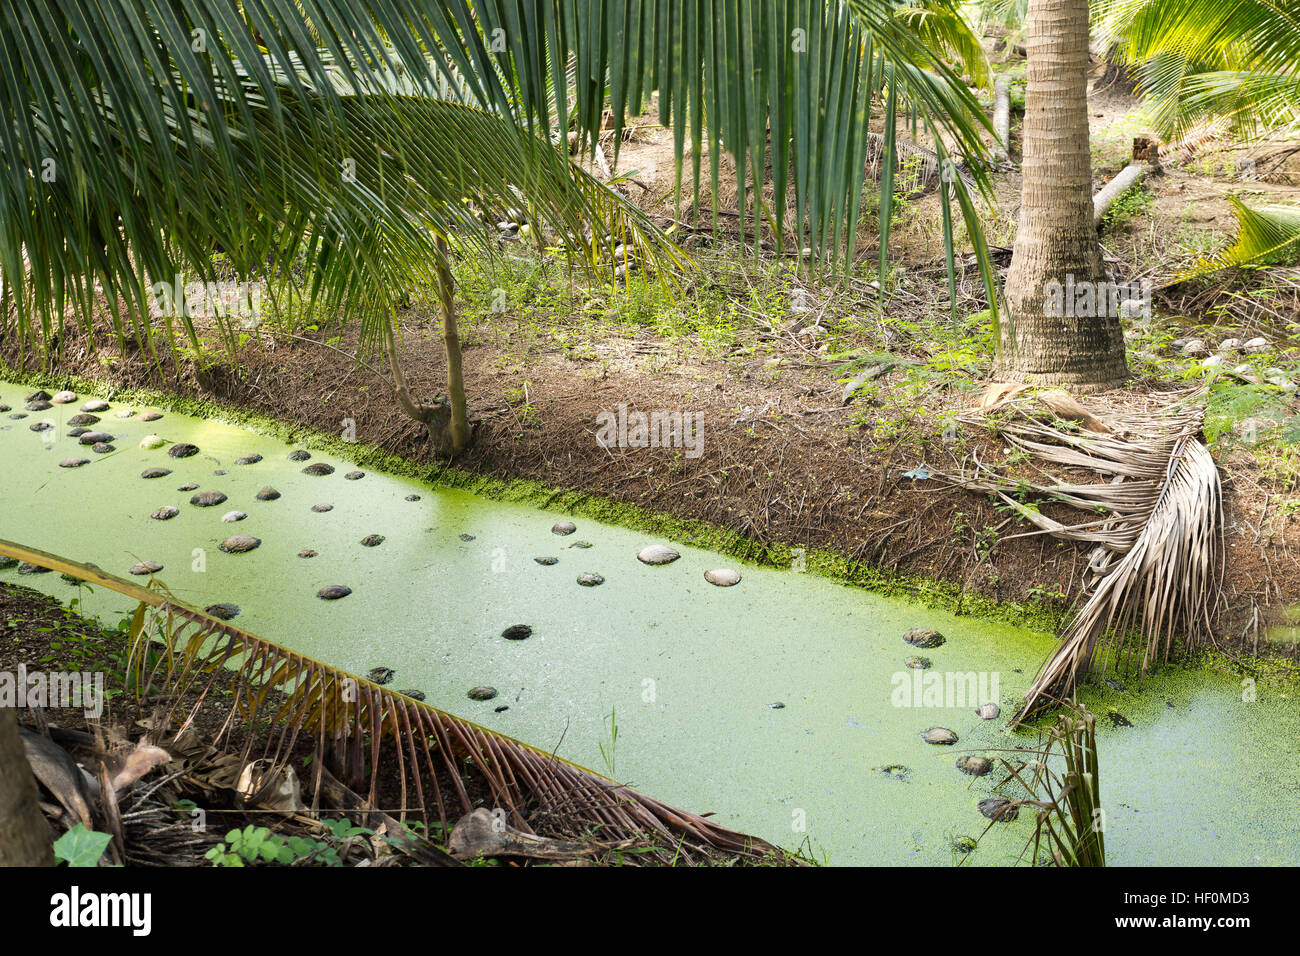 Green algae floats on the surface of an irrigation canal in a coconut cultivation area near Bangkok, Thailand Stock Photo